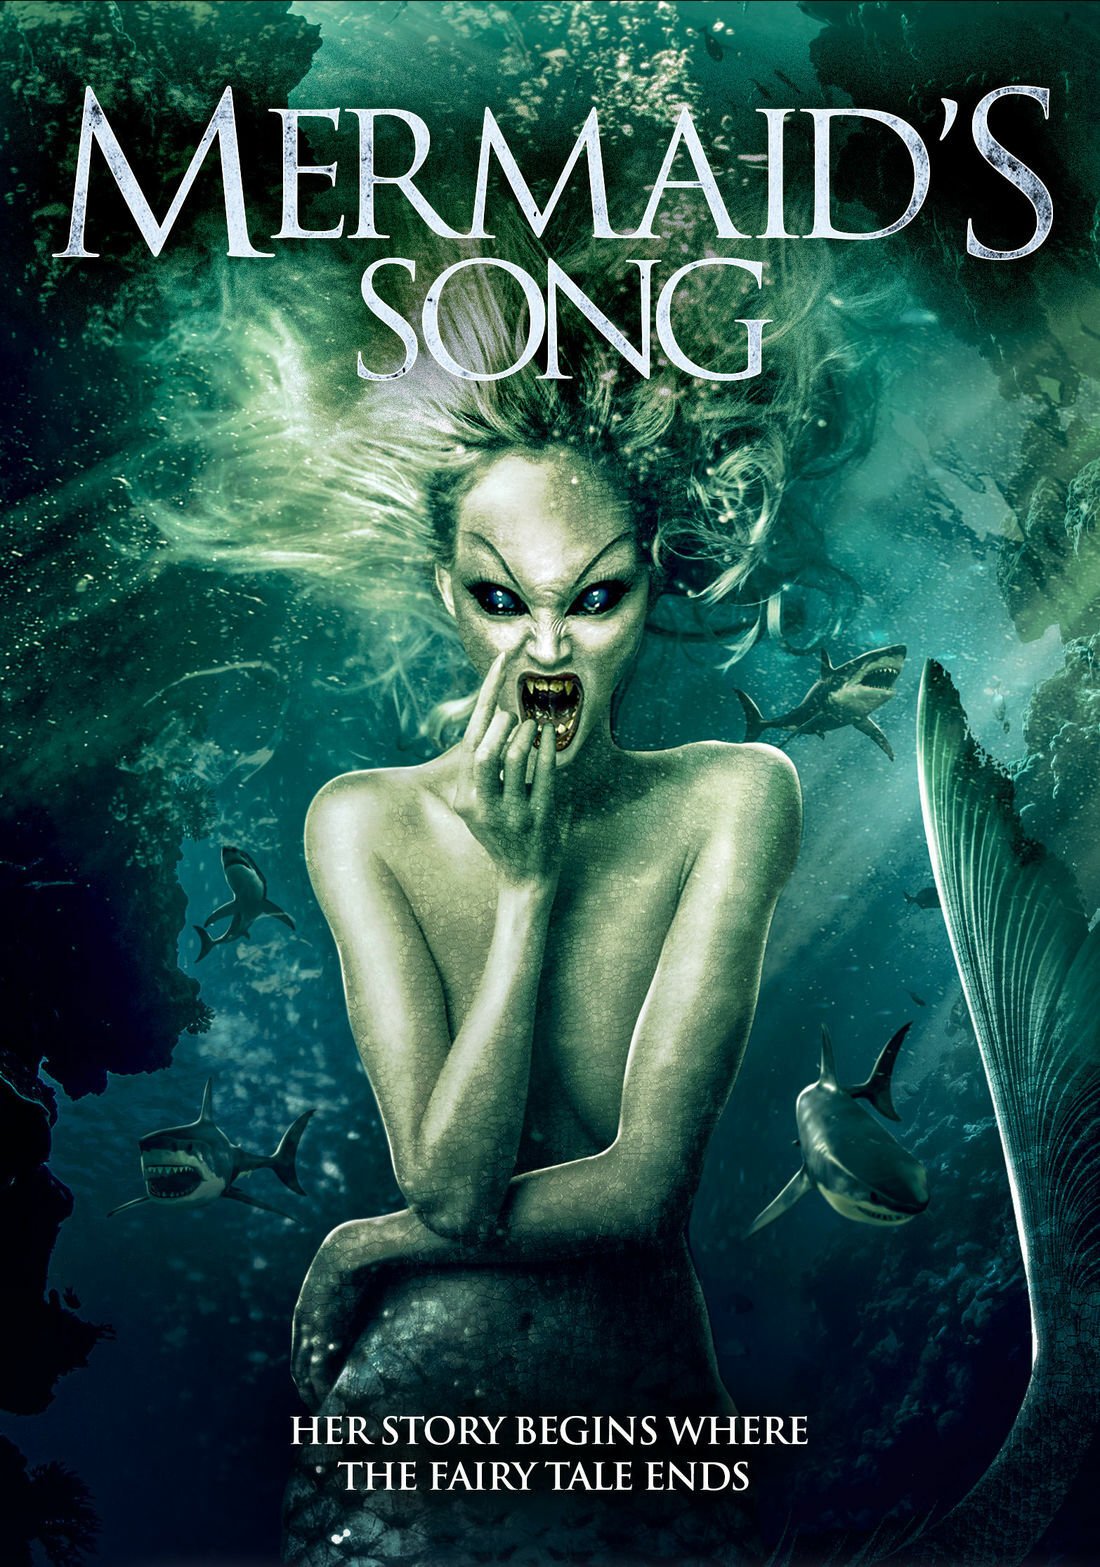 The Mermaid's Song poster